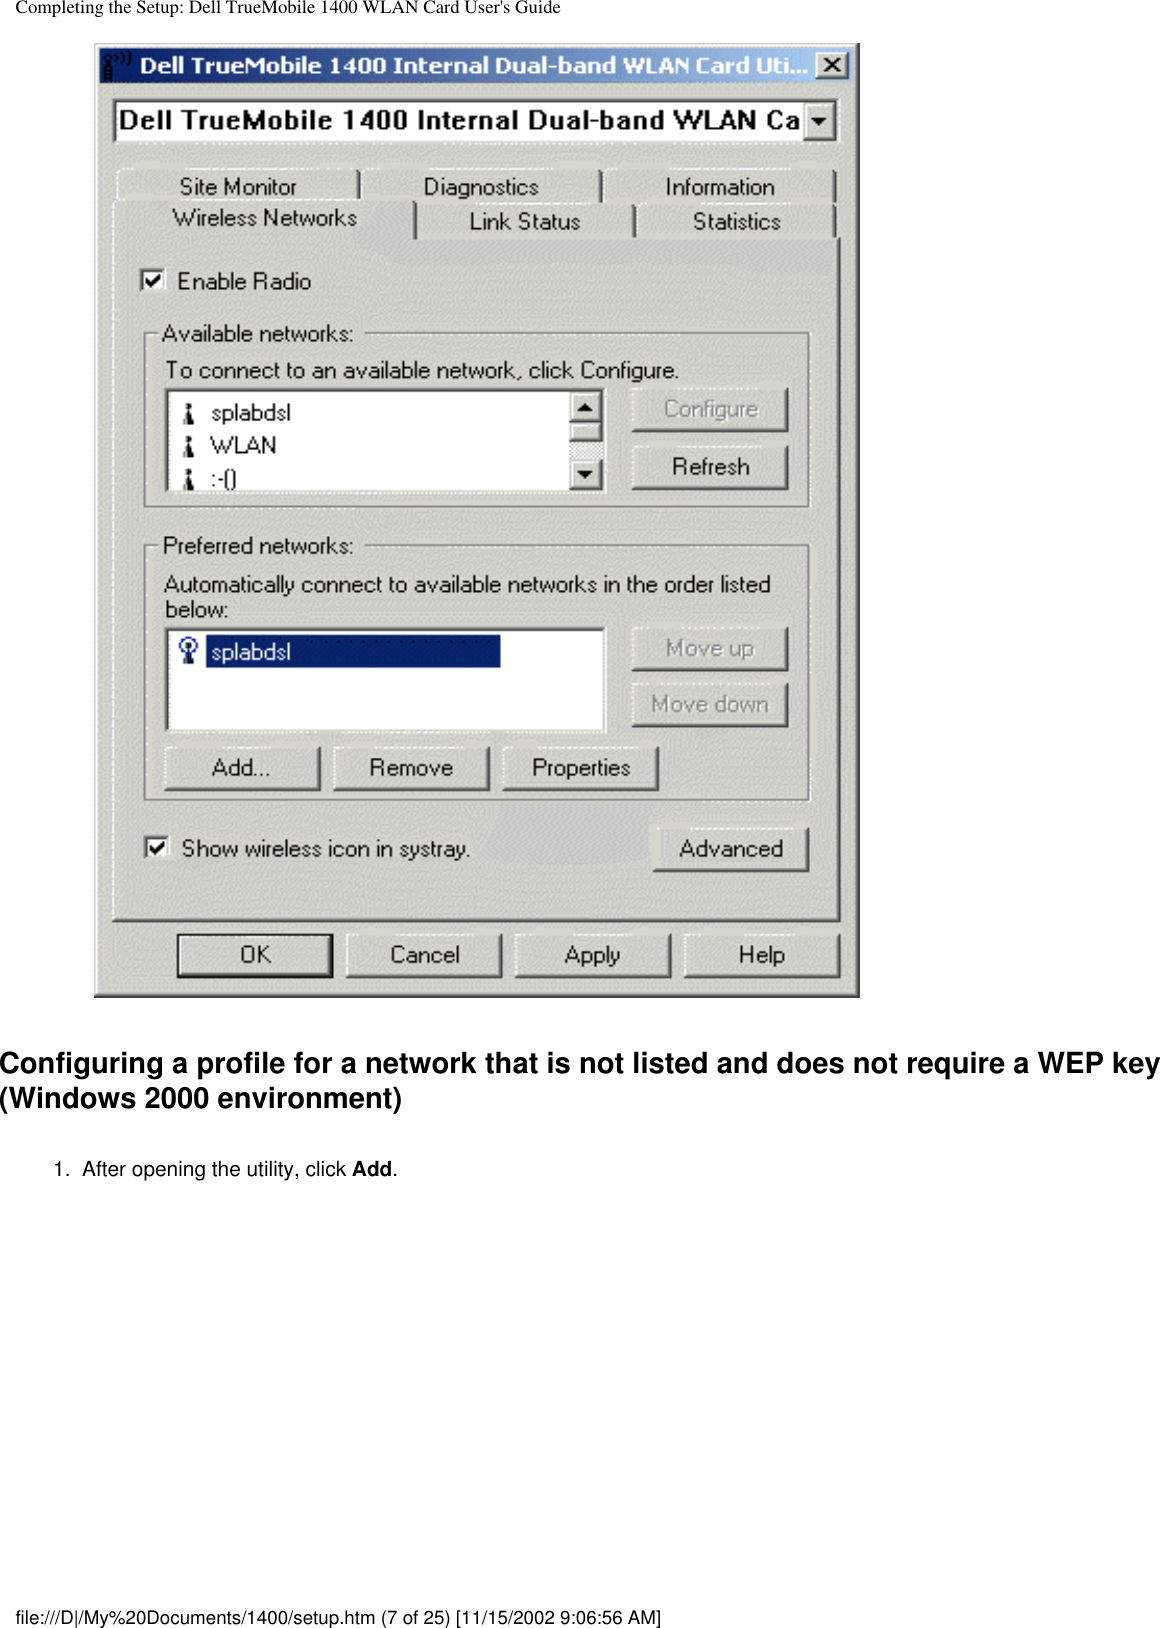 Completing the Setup: Dell TrueMobile 1400 WLAN Card User&apos;s GuideConfiguring a profile for a network that is not listed and does not require a WEP key (Windows 2000 environment)1.  After opening the utility, click Add. file:///D|/My%20Documents/1400/setup.htm (7 of 25) [11/15/2002 9:06:56 AM]